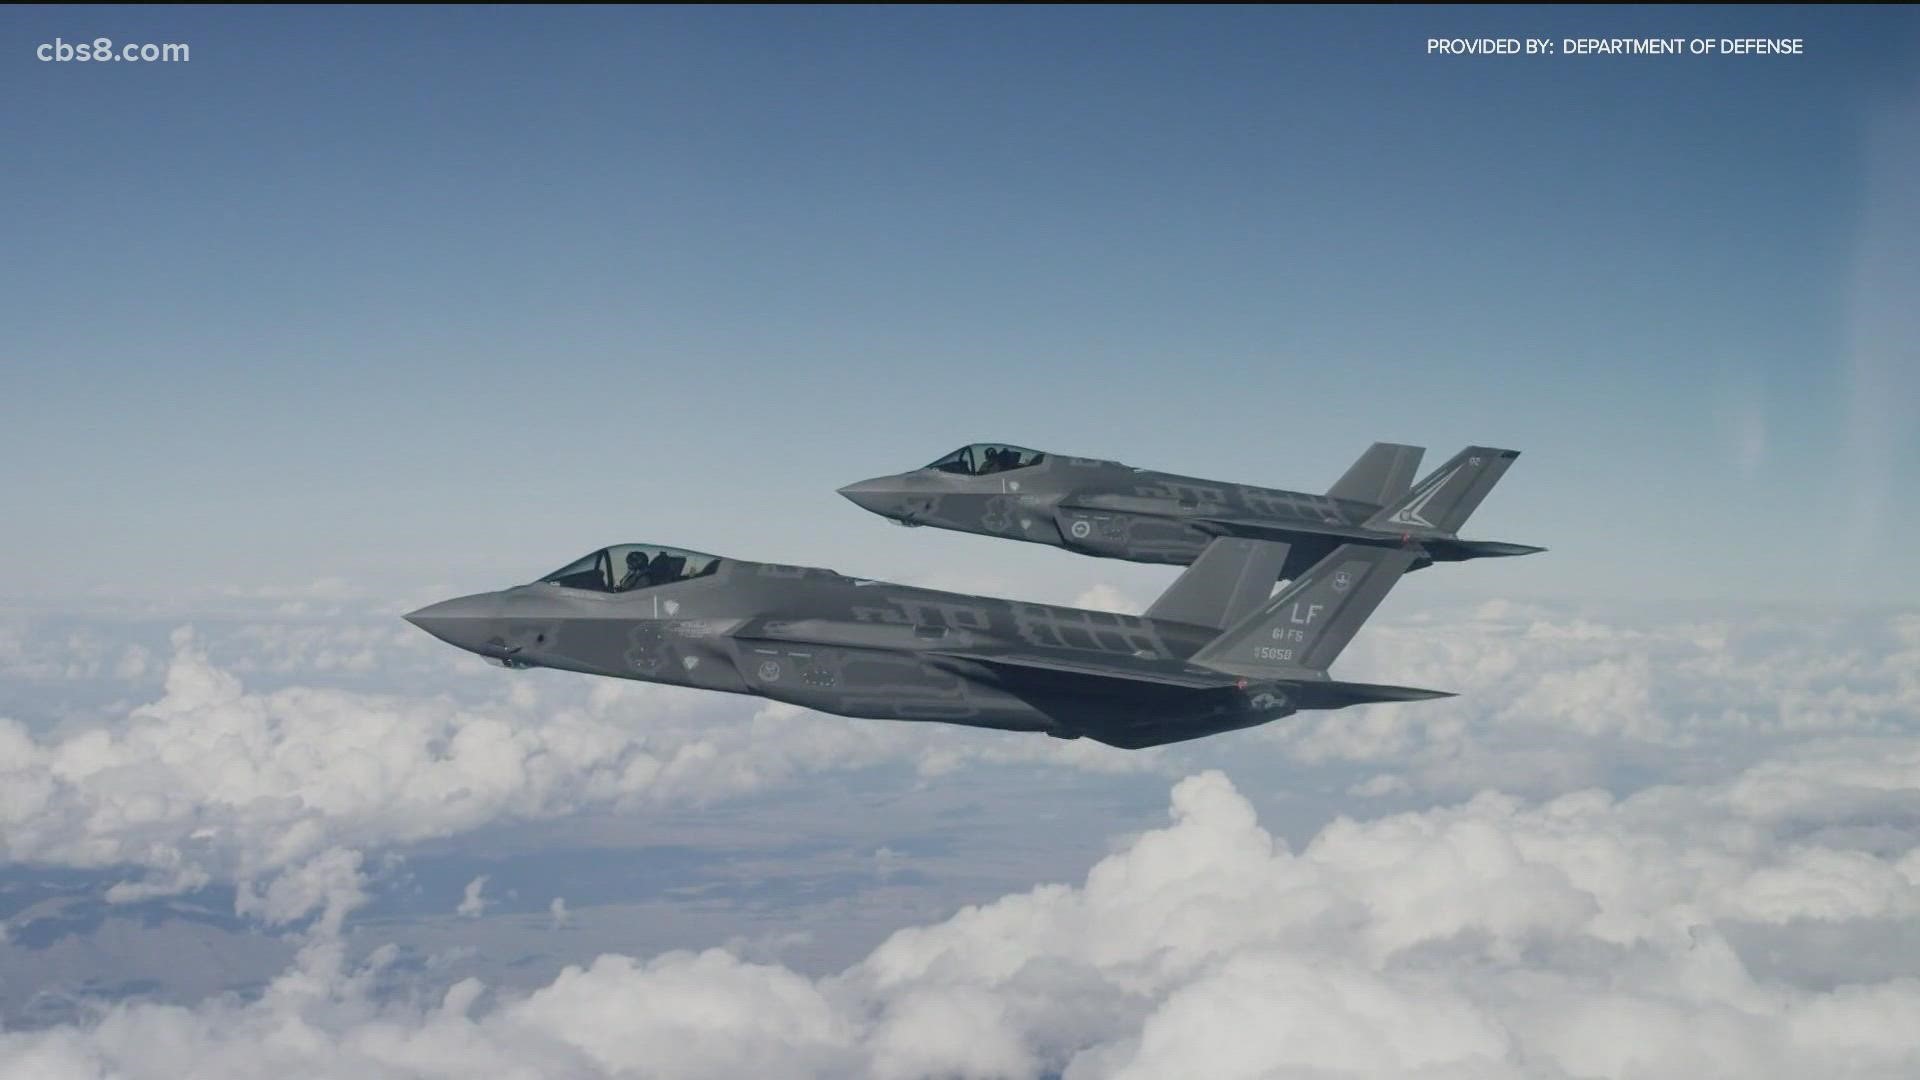 The F-35C is a top-of-the-line fighter jet, and about 60 of them are stationed at MCAS Miramar.